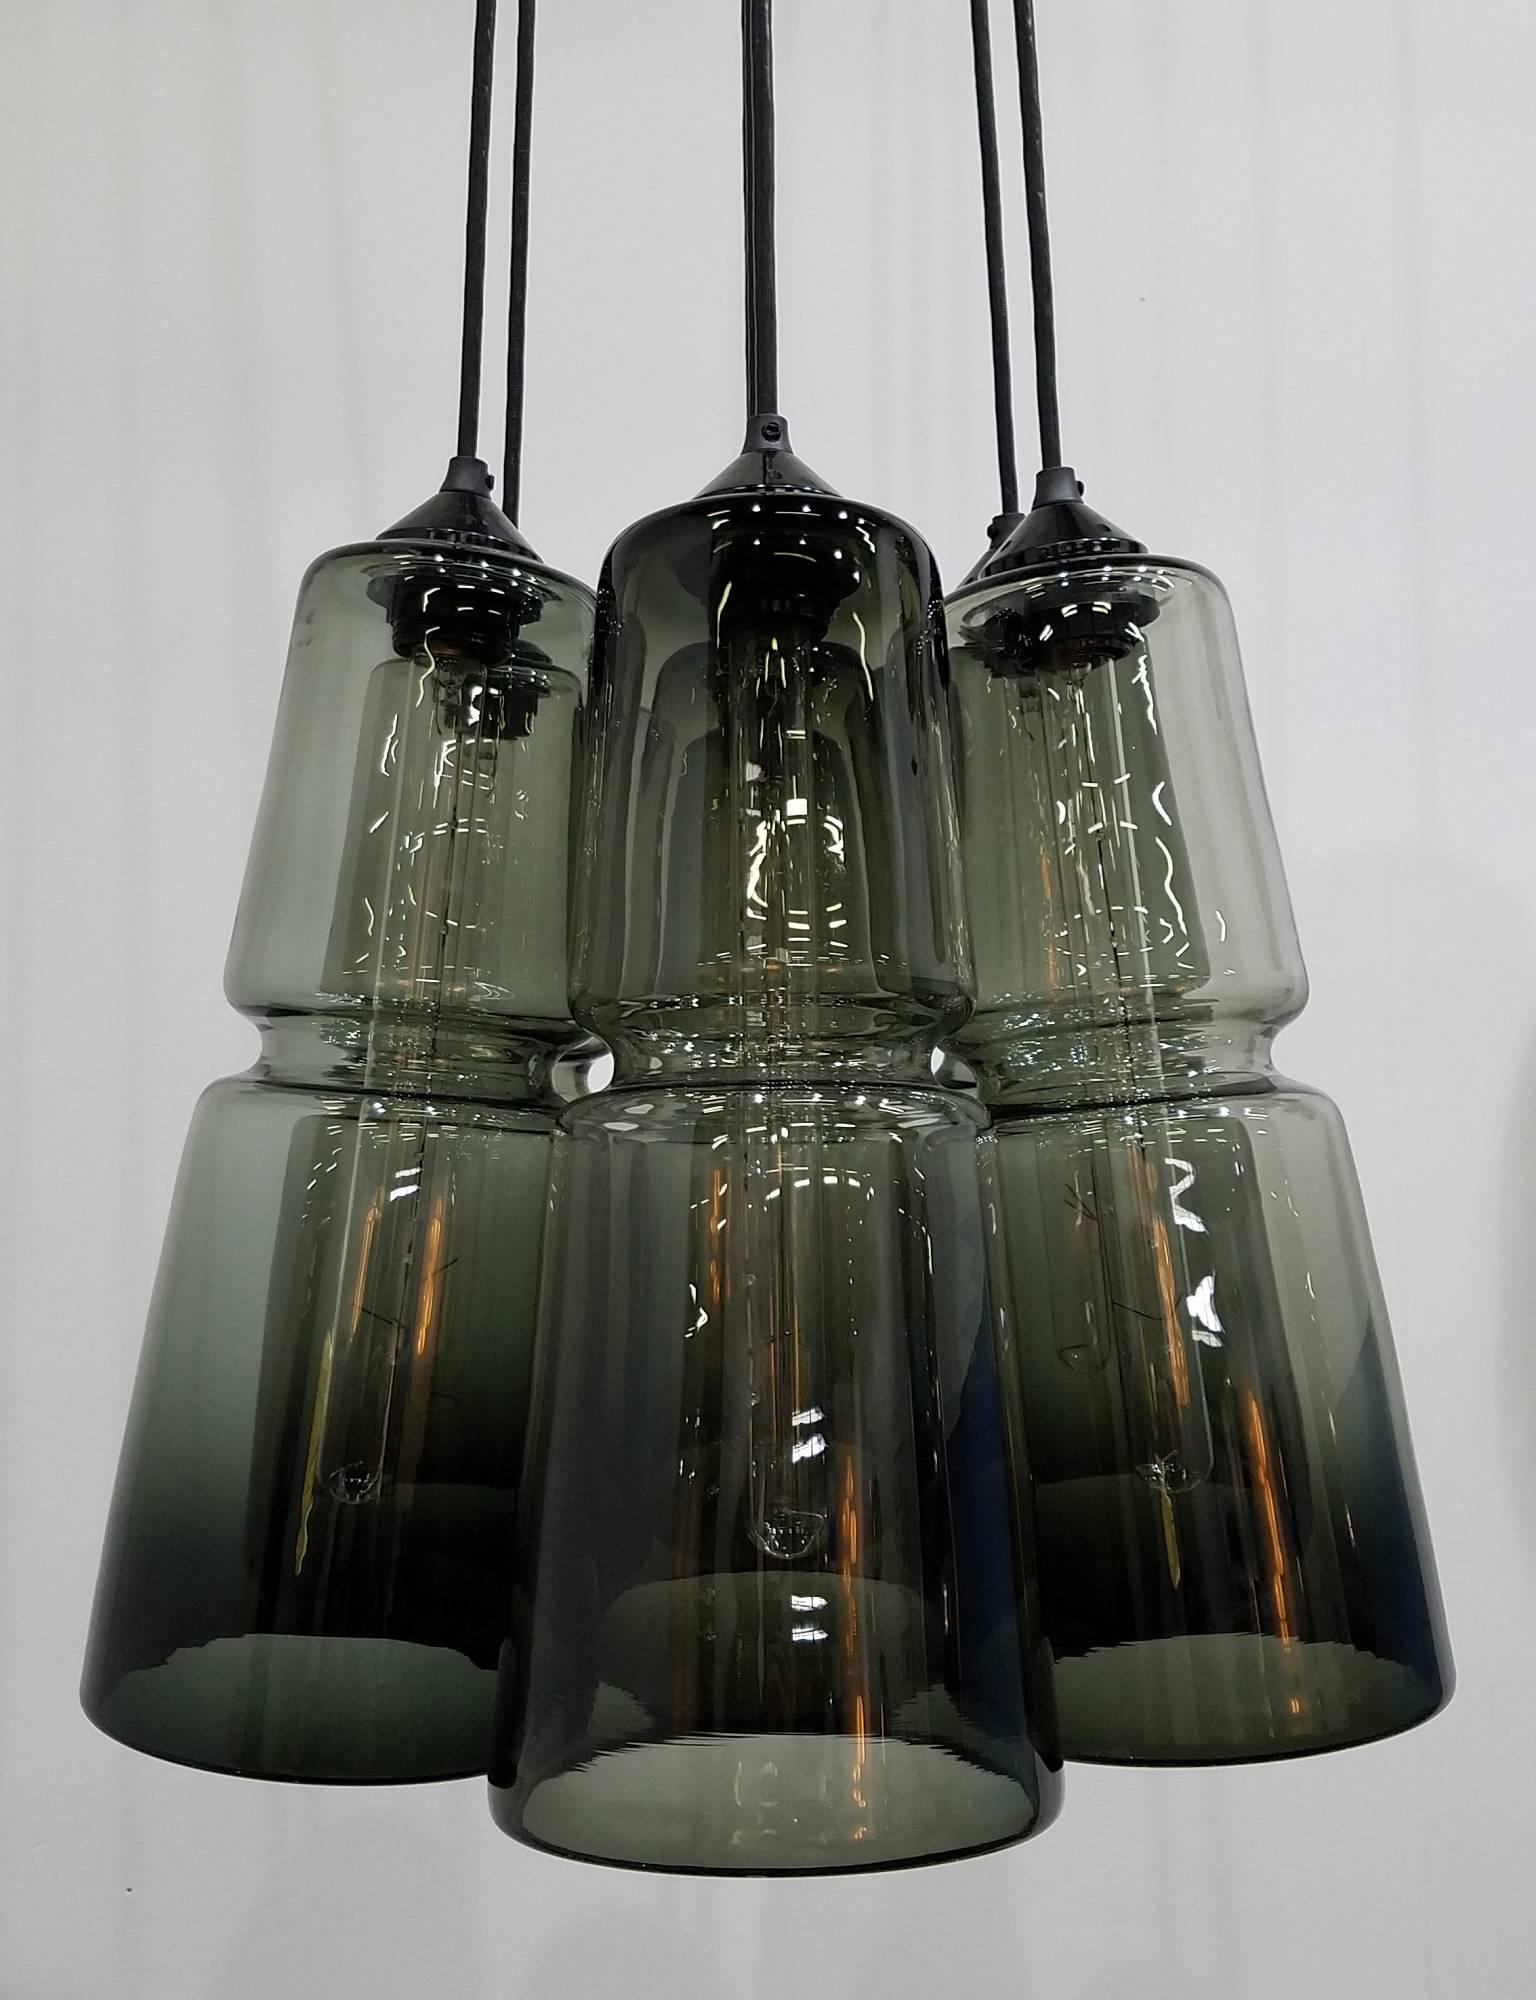 Multiple component chandelier, the arrangement as shown is comprised of seven (7) Groove Series Cylinder pendants which each have an embedded horizontal groove that provides a precise machine-made quality to these wholly handmade designs. Available